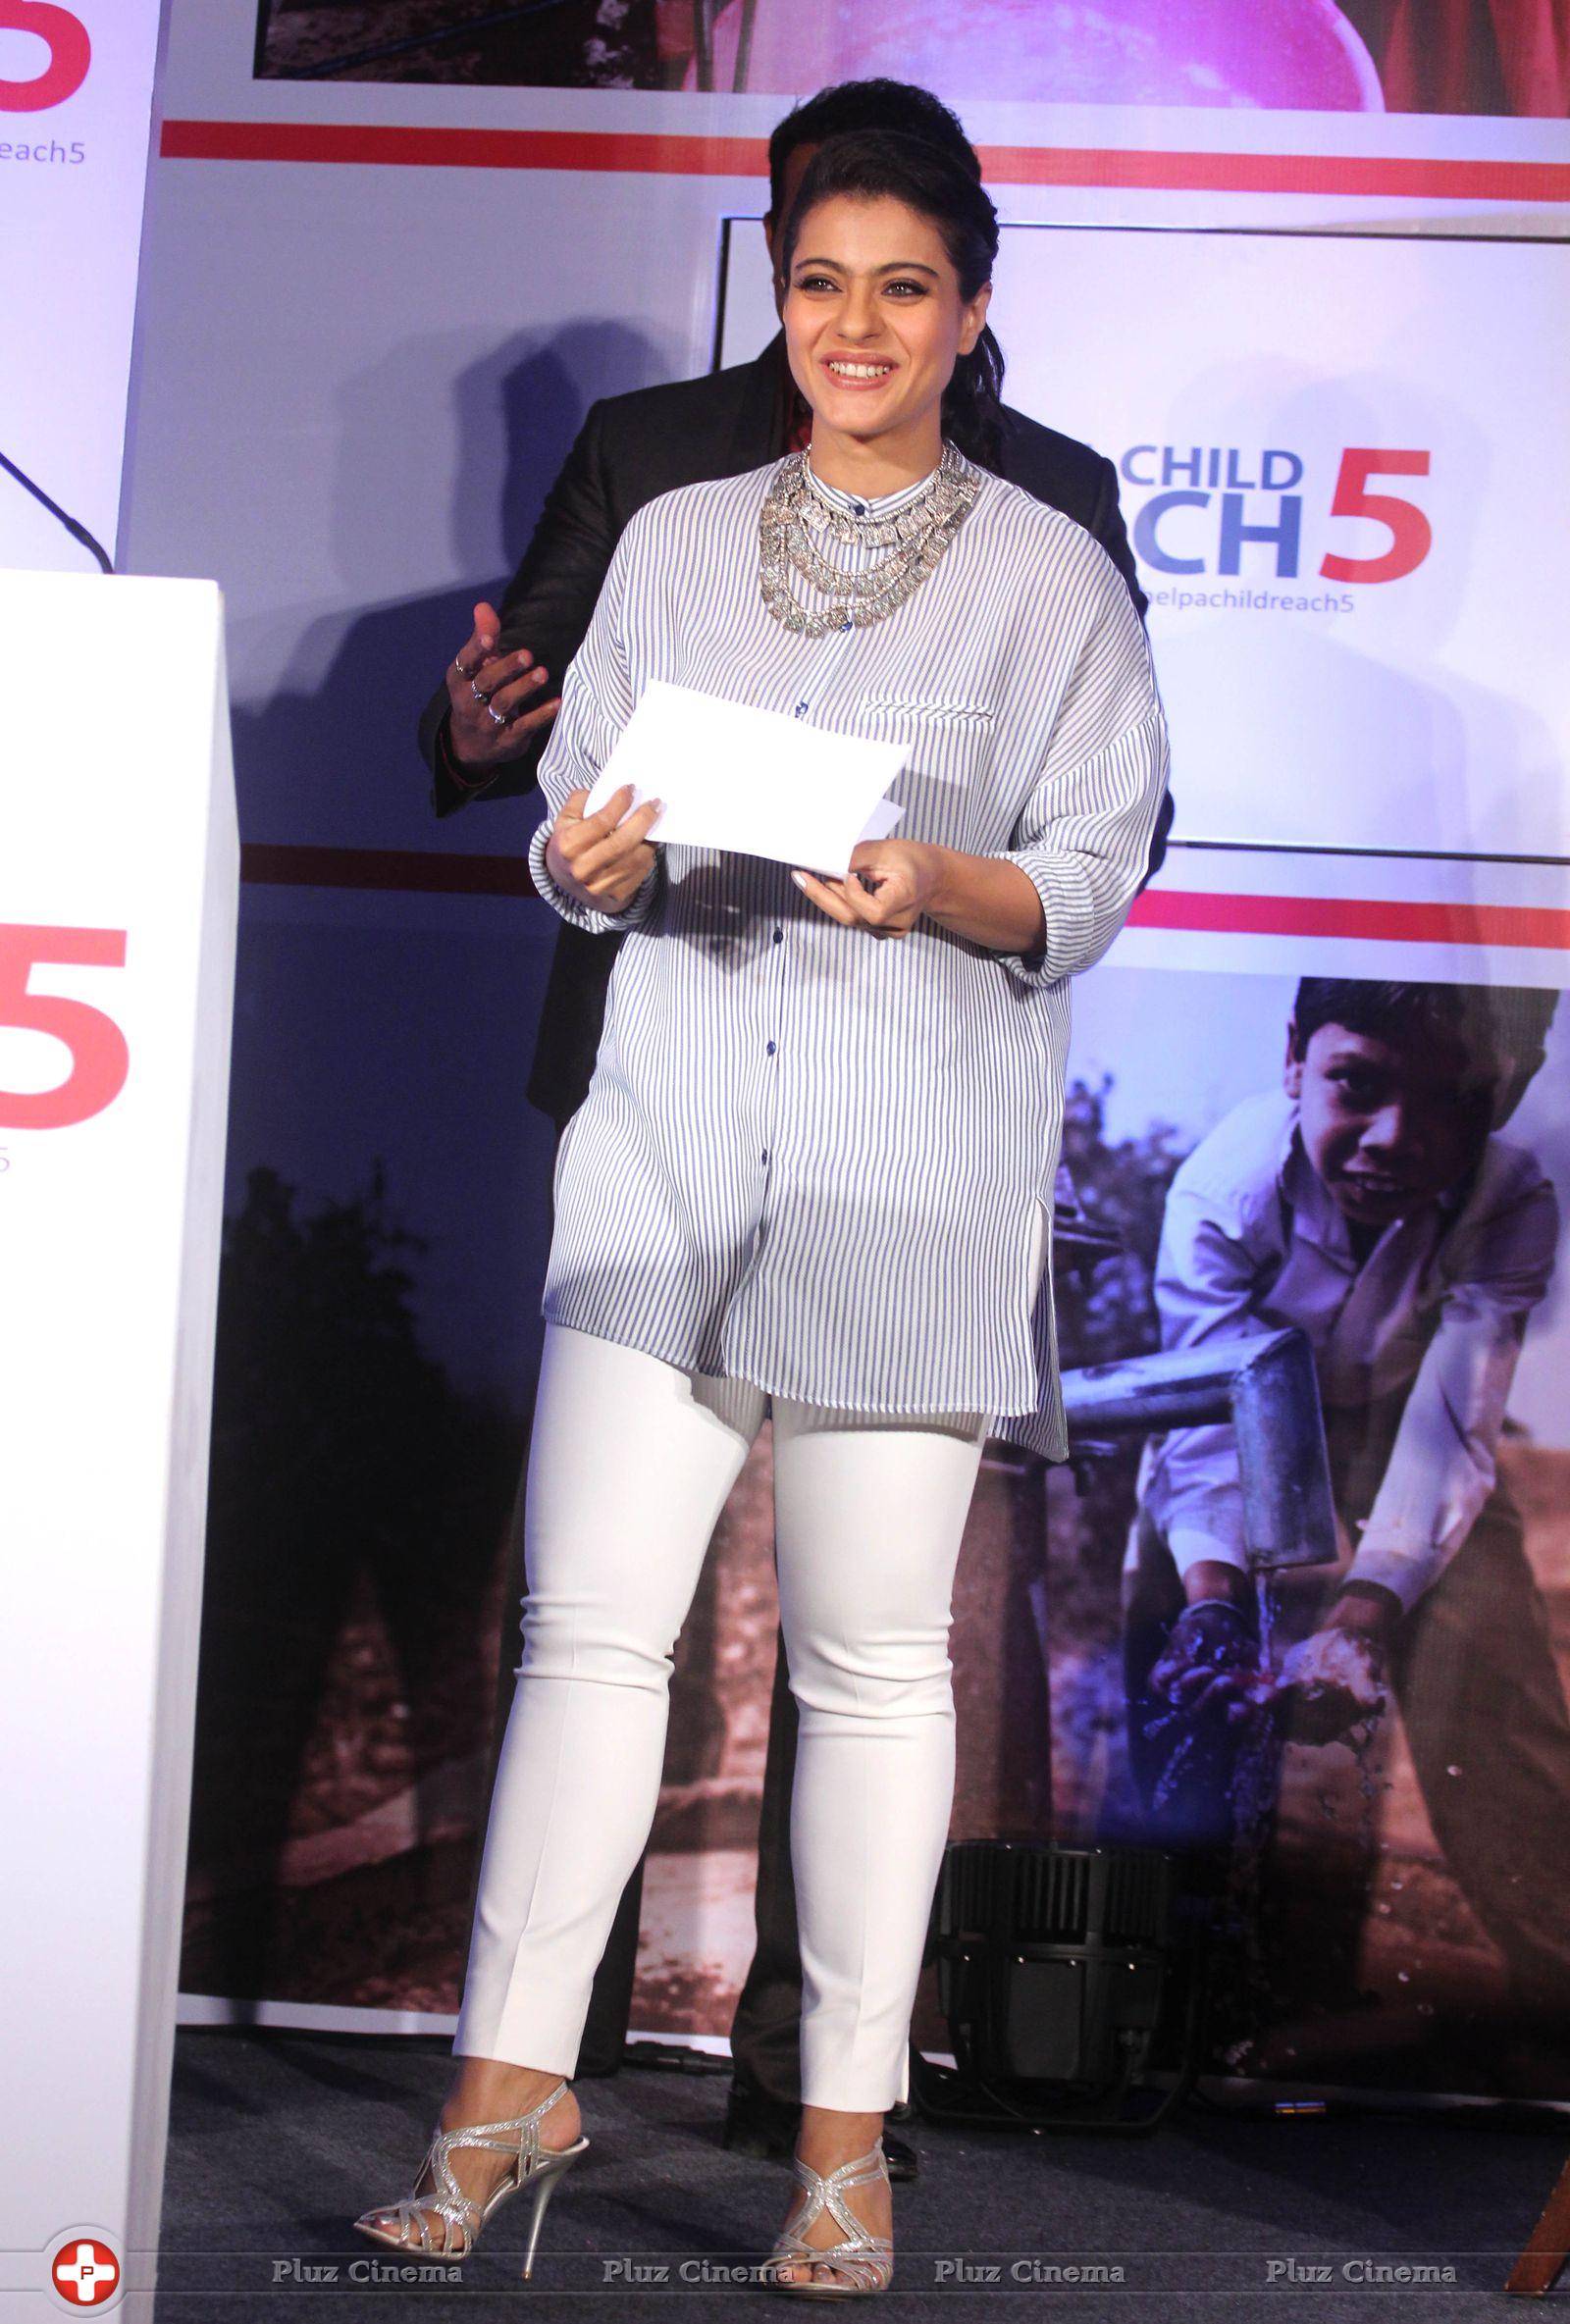 Kajol - Kajol at The Announcement of help a Child Research 5 hand washing programme Photos | Picture 730635